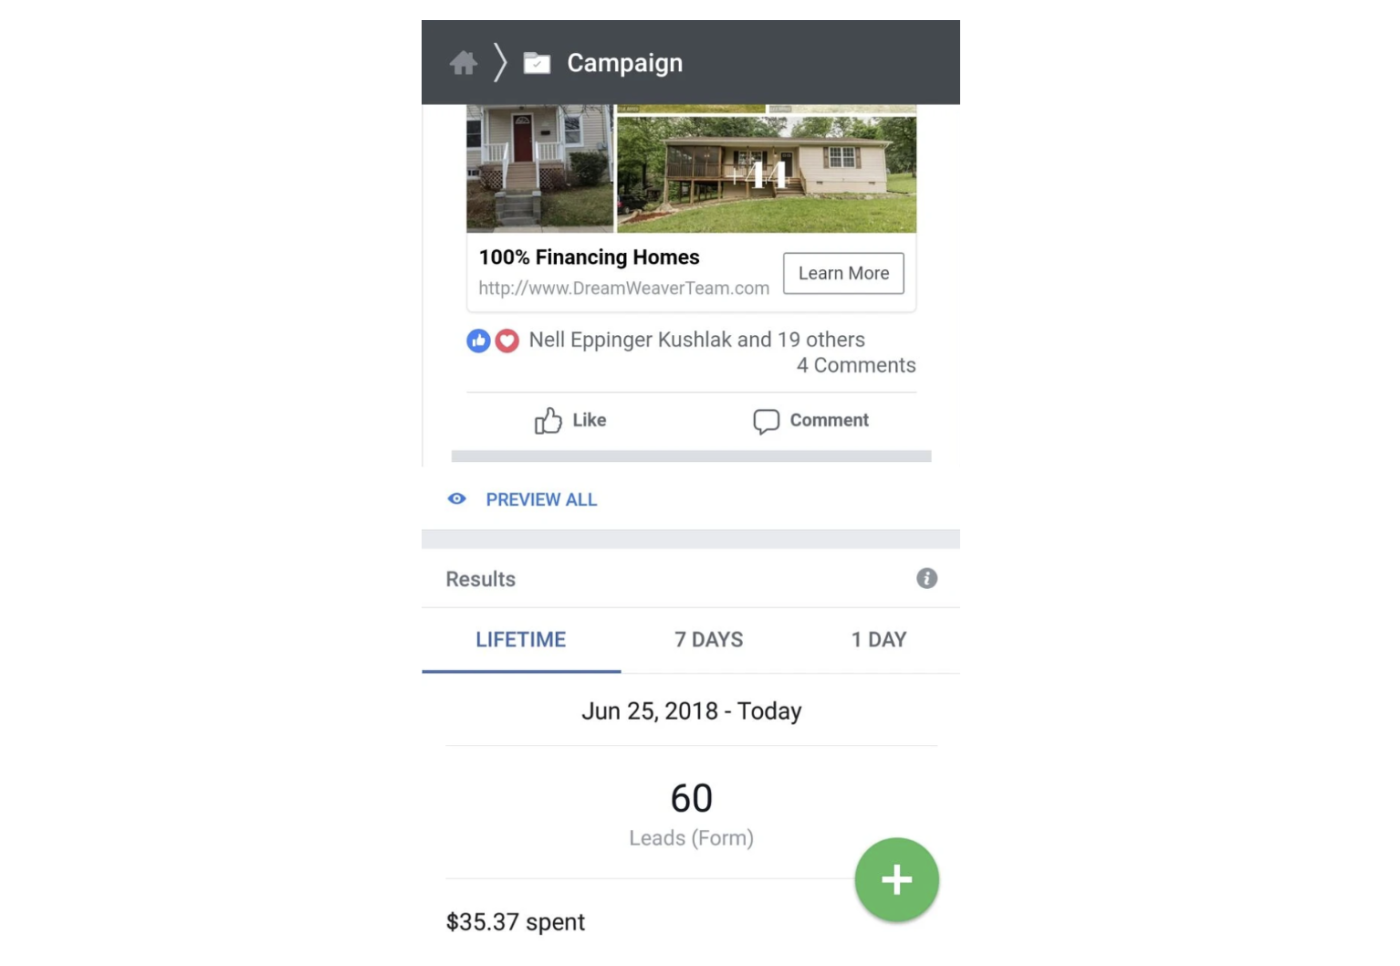 Spend per lead on Facebook lead ads